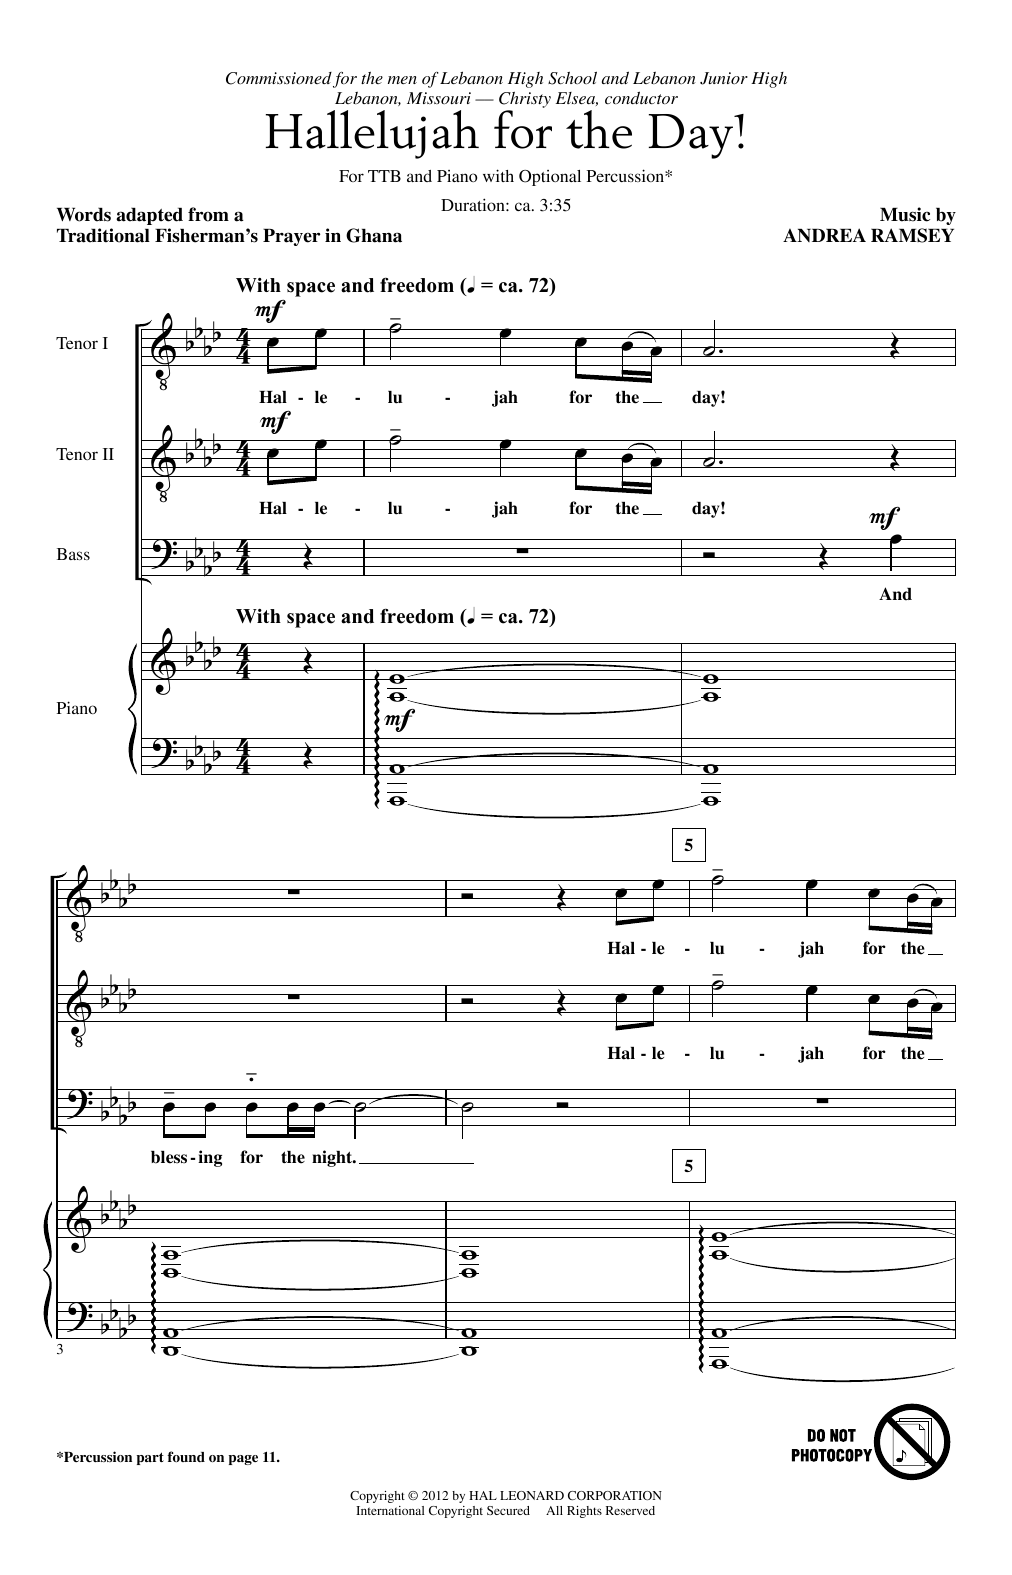 Download Andrea Ramsey Hallelujah For The Day! Sheet Music